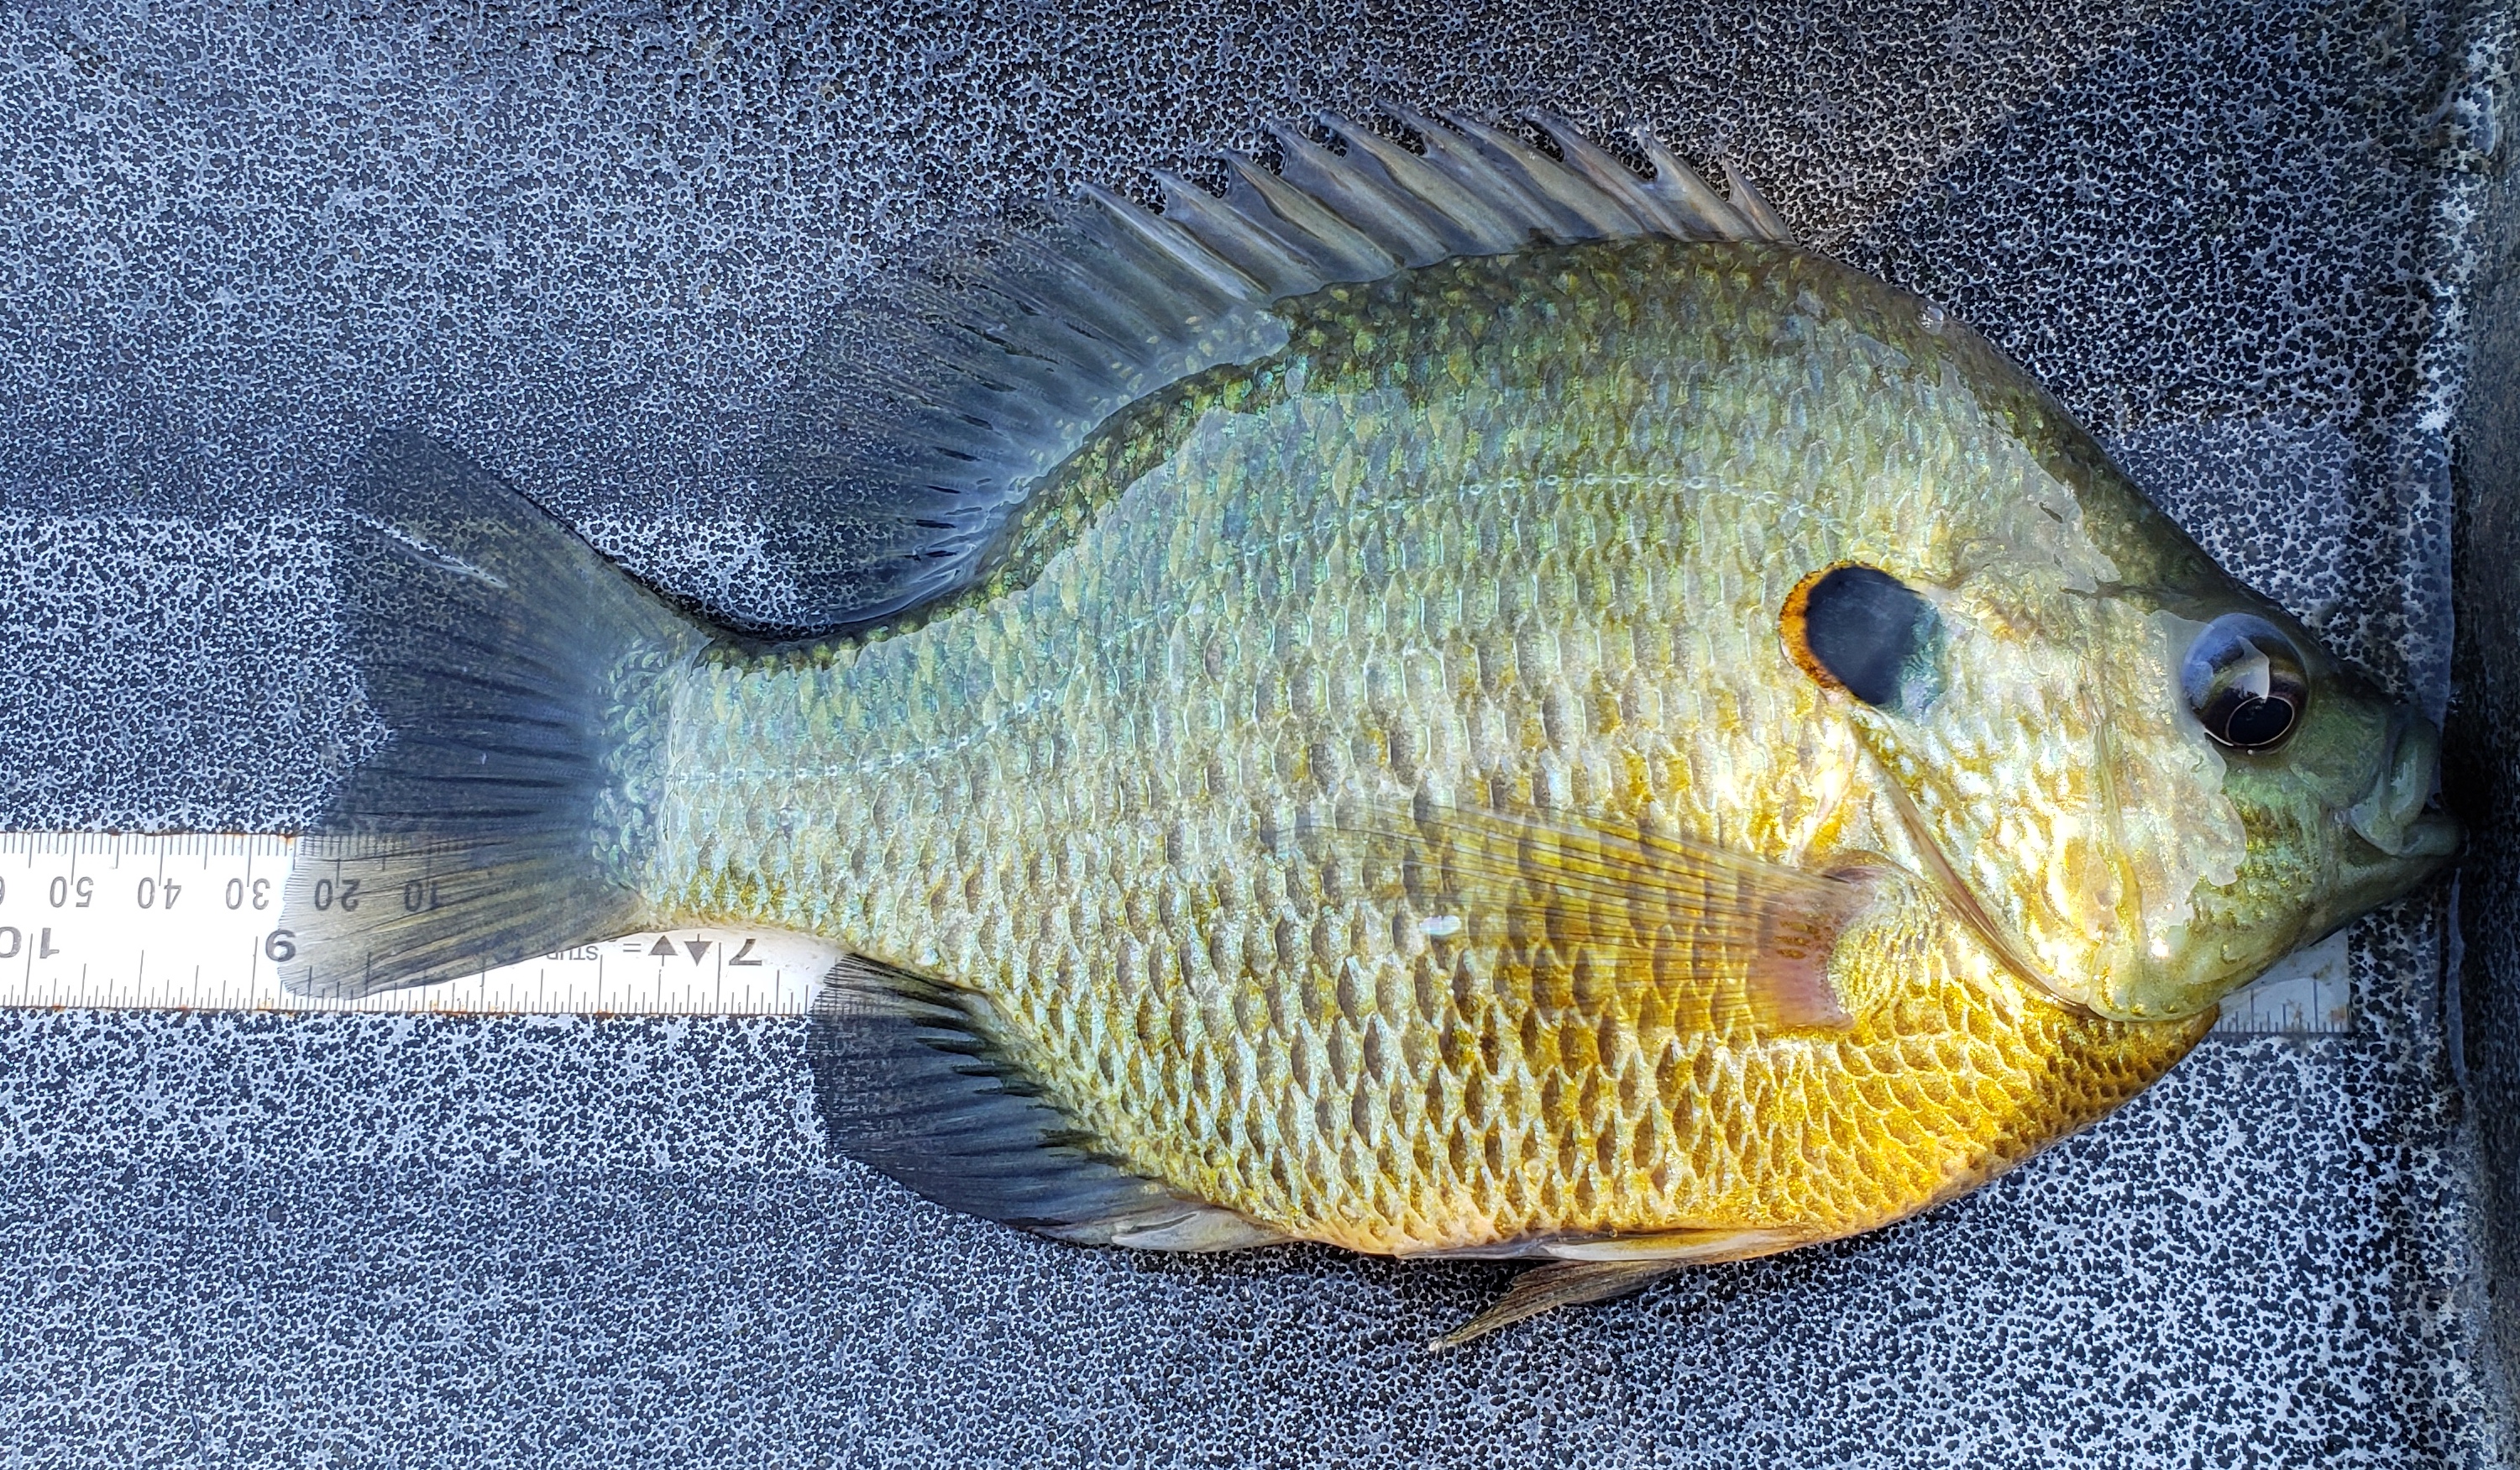 Why Stock Redear Sunfish?